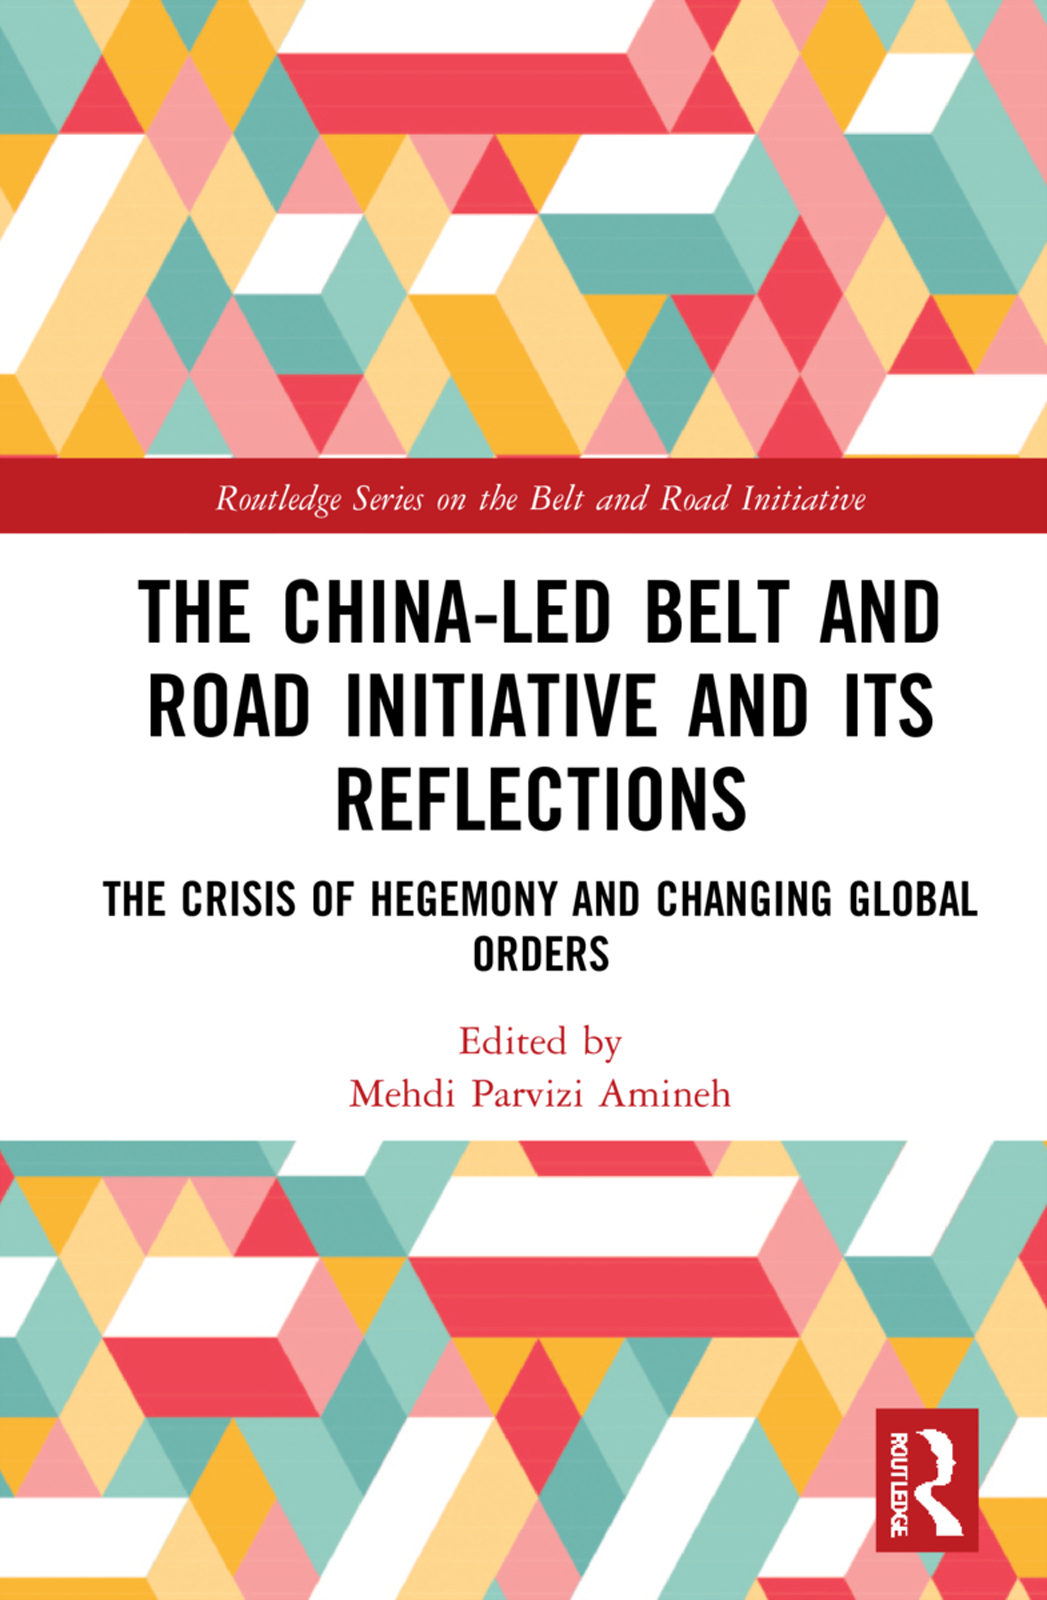 The China-led Belt and Road Initiative and its Reflections